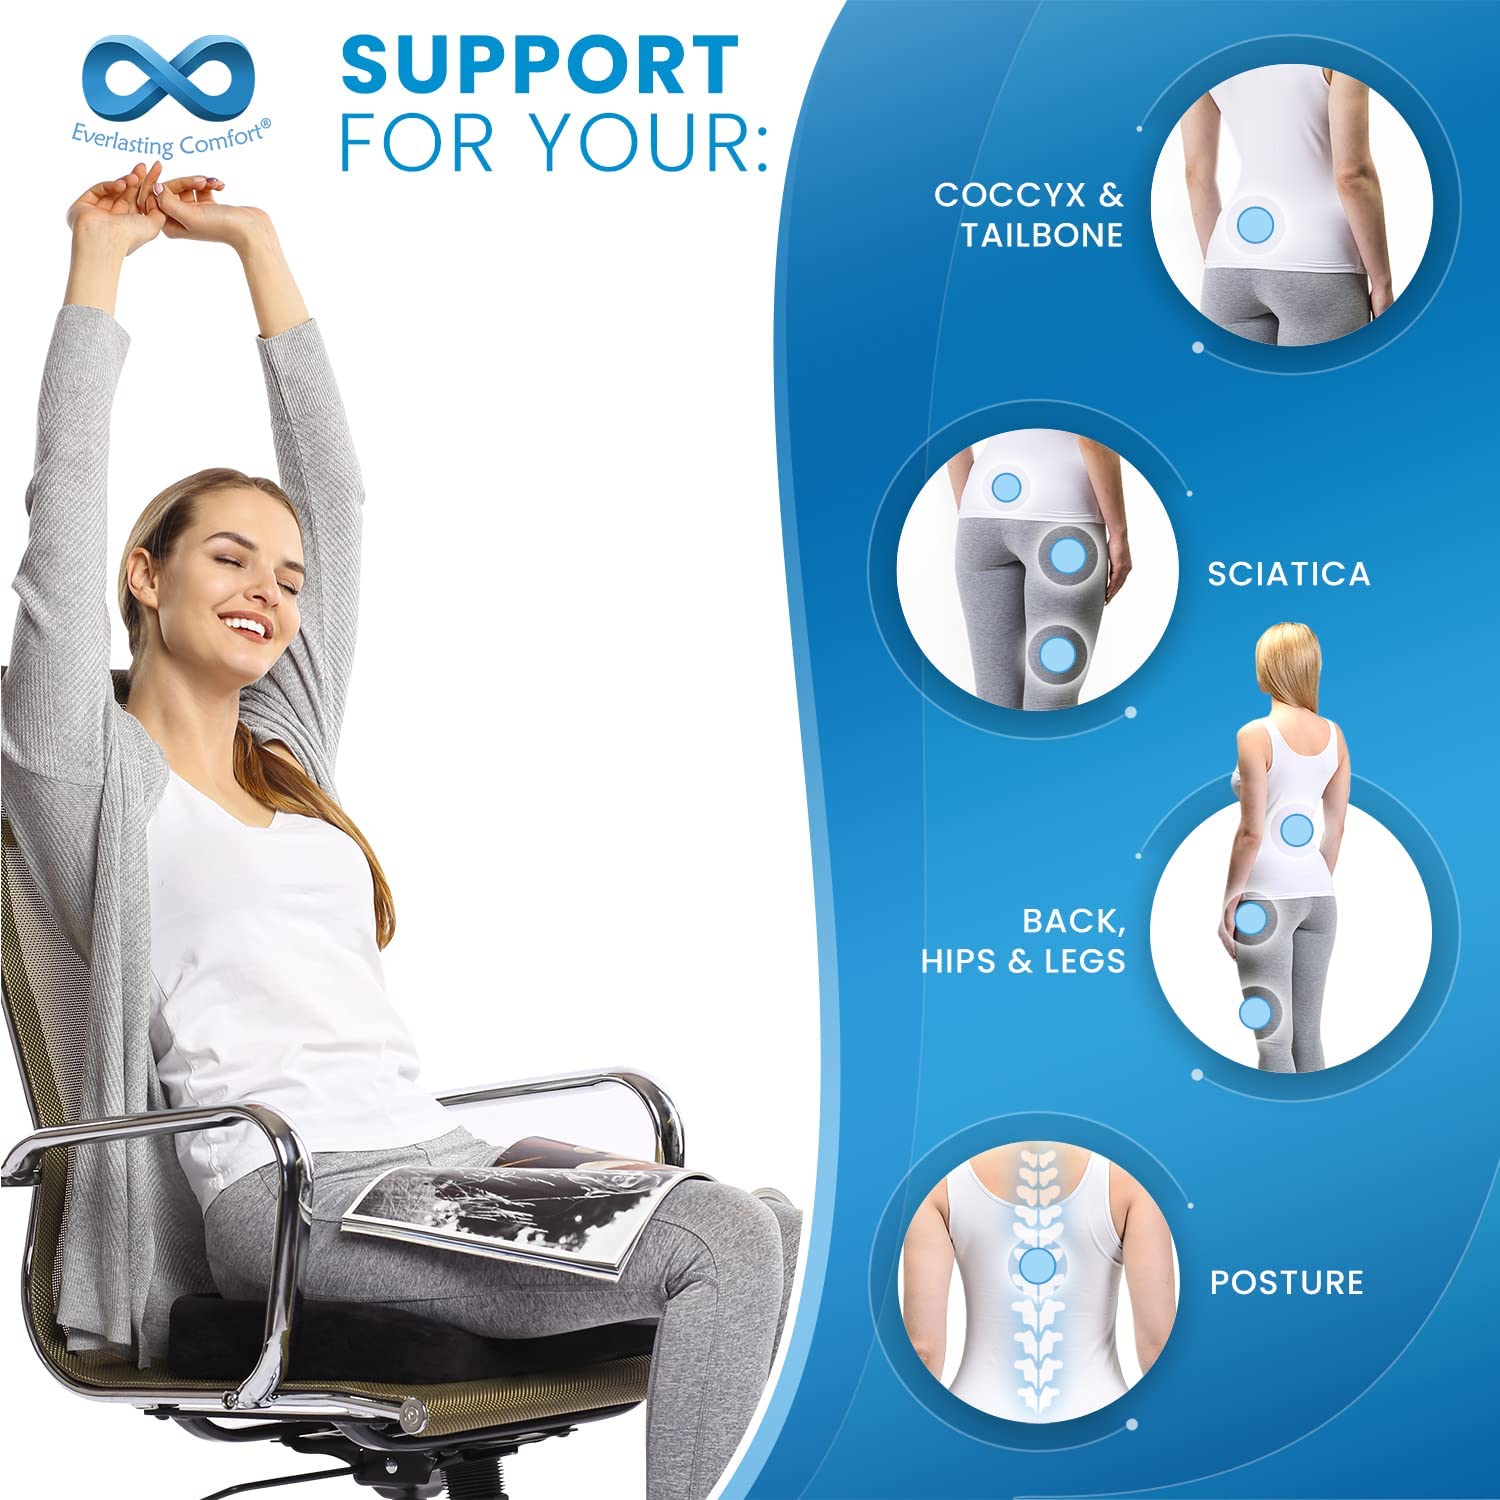 https://discounttoday.net/wp-content/uploads/2022/09/Everlasting-Comfort-Office-Chair-Seat-Cushion-Pillow-for-Back-Coccyx-Tailbone-Pain-Support-Pad3.jpg